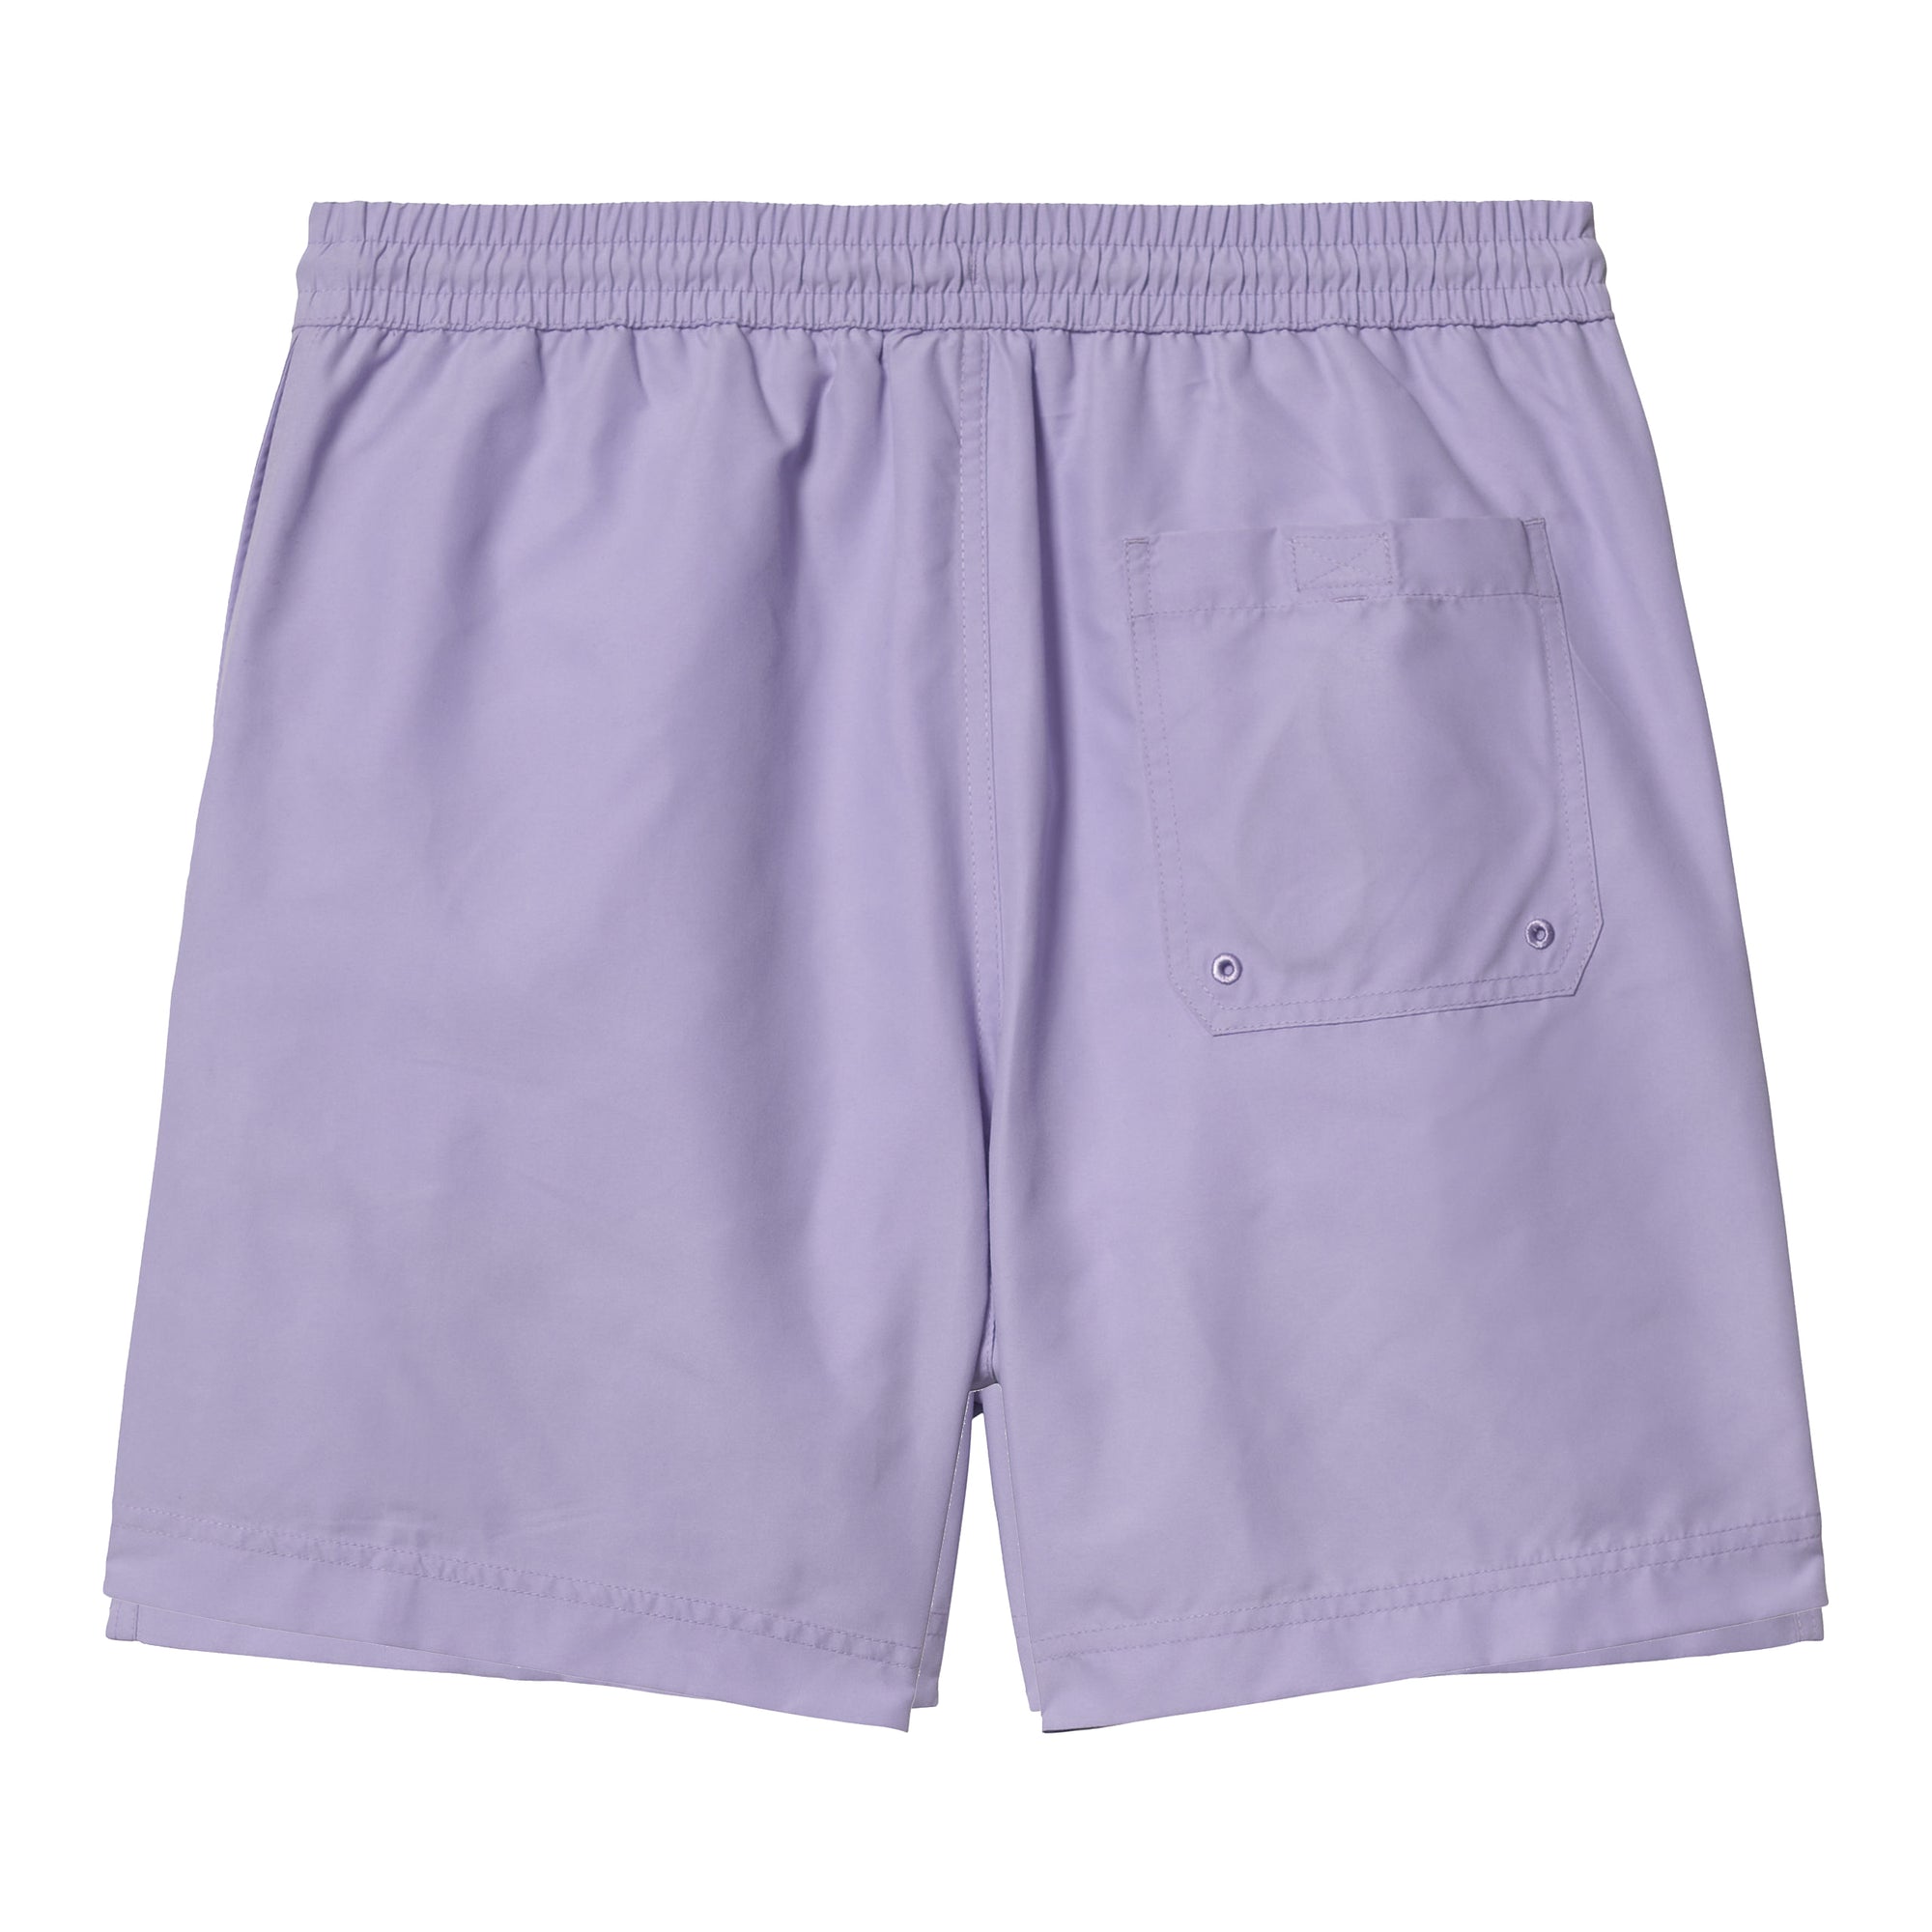 Chase Swim Trunk SOFT LAVENDER/GOLD
The Chase Swim Trunks are constructed from lightweight fabric with water-repellent and fast-drying qualities. Lined with mesh, they also feature an embroidered Carhartt WIP ‘C’ logo on the left leg, two side seam pockets, an adjustable waistband, and a key holder in the back pocket.

I026235_0XW_XX
100% polyester
Regular fit
Water-repellent
Mesh lining
Side seam pockets
Back pocket with key holder
 CARHARTT WIP